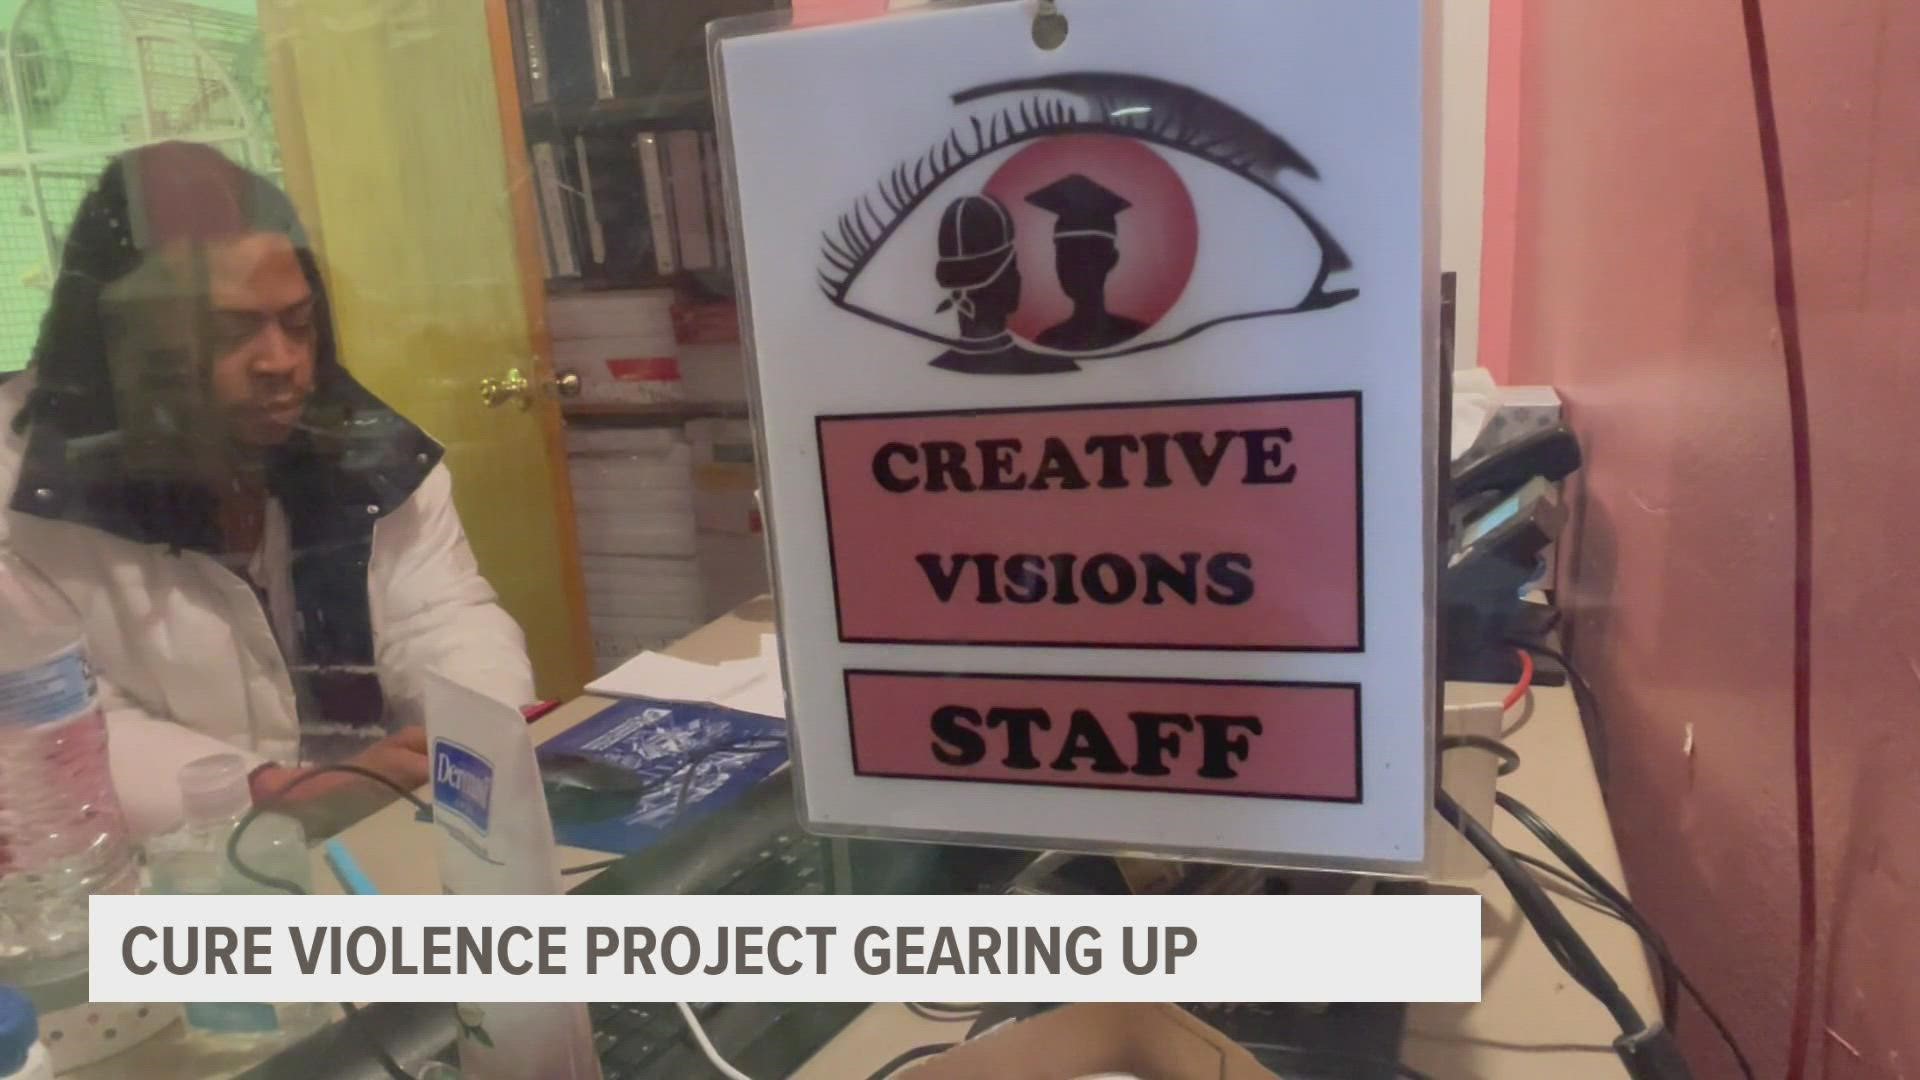 The partnership between Creative Visions and the City of Des Moines is working to tackle gun violence.